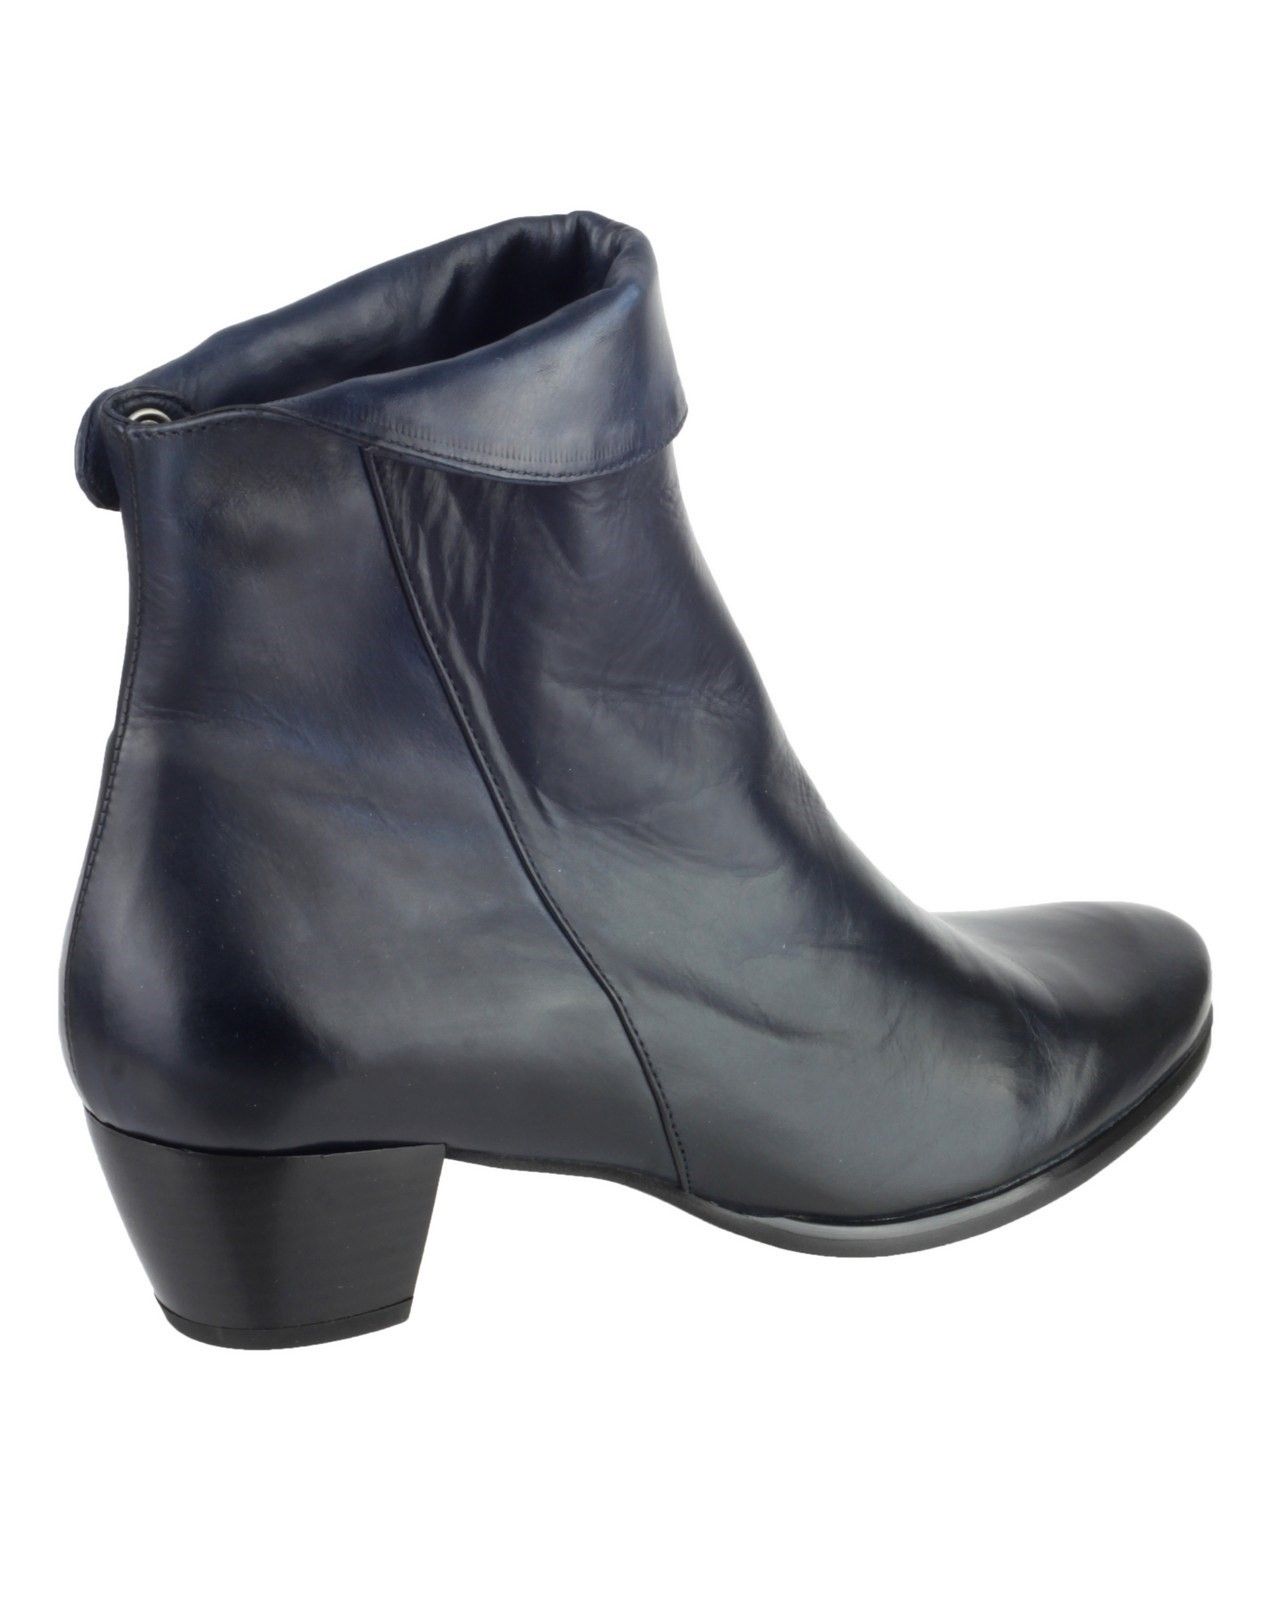 Riva brings classic Italian style with a twist with the Armadillo leather dress boot. A turn down cuff gives an asymmetric edge whilst a mid-height block heel oozes timeless elegance. Full inside zip for easy on and off. Riva Armadillo Leather Ladies Boots. 
Smooth leather upper with soft leather lining. 
Side zip fastening. 
Pull on loop at back. 
Medium block heel.